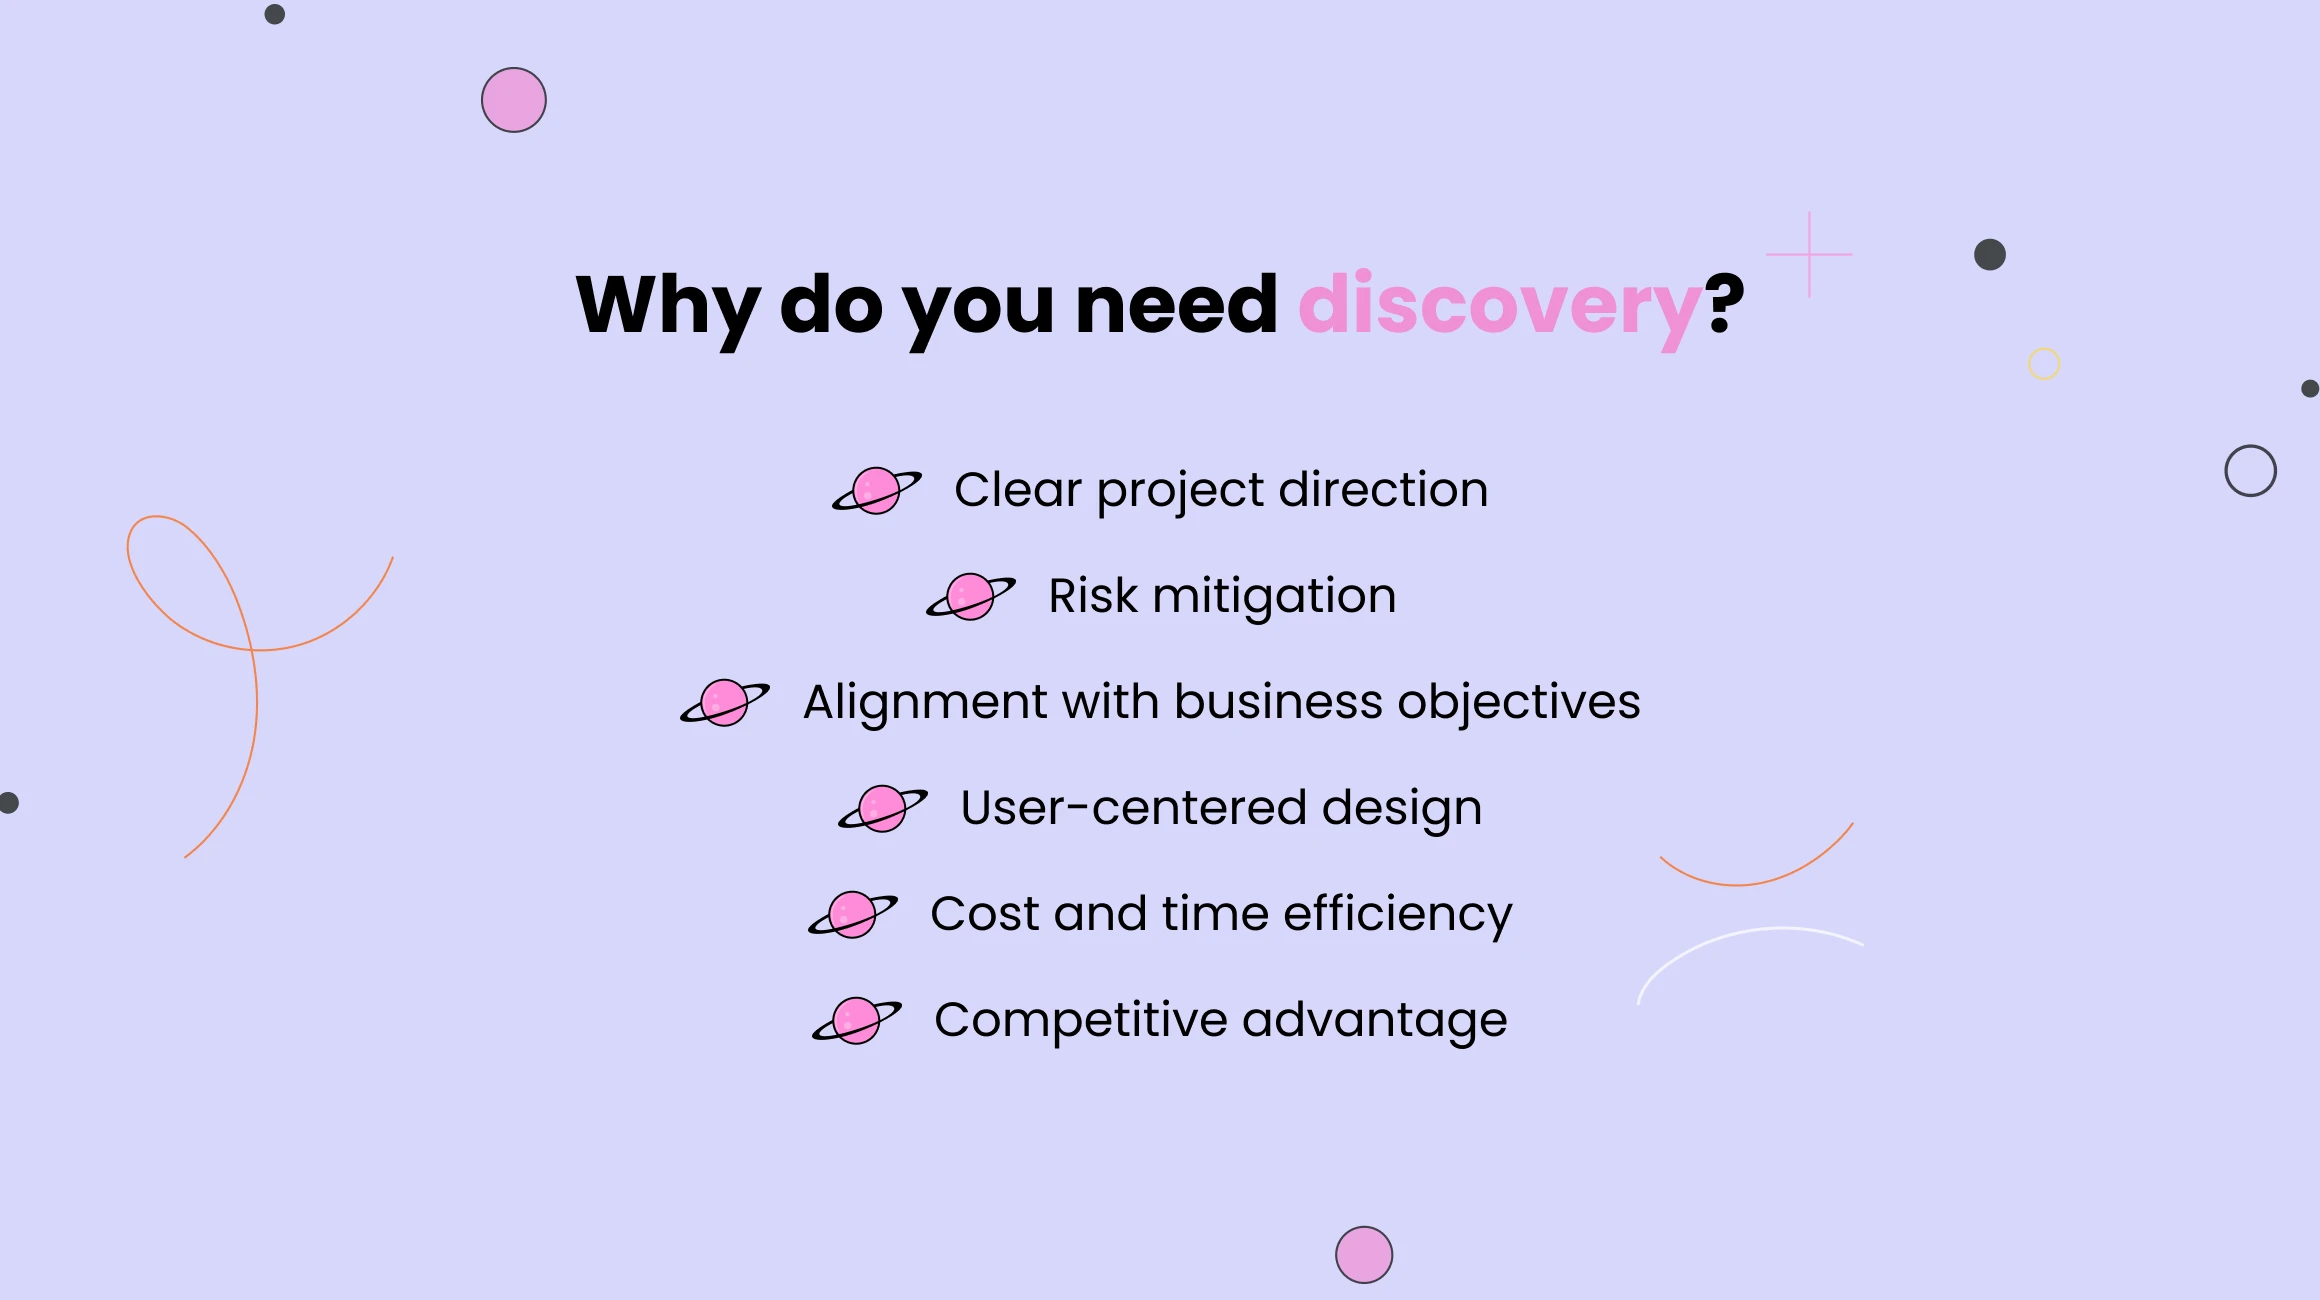 Why do you need discovery?